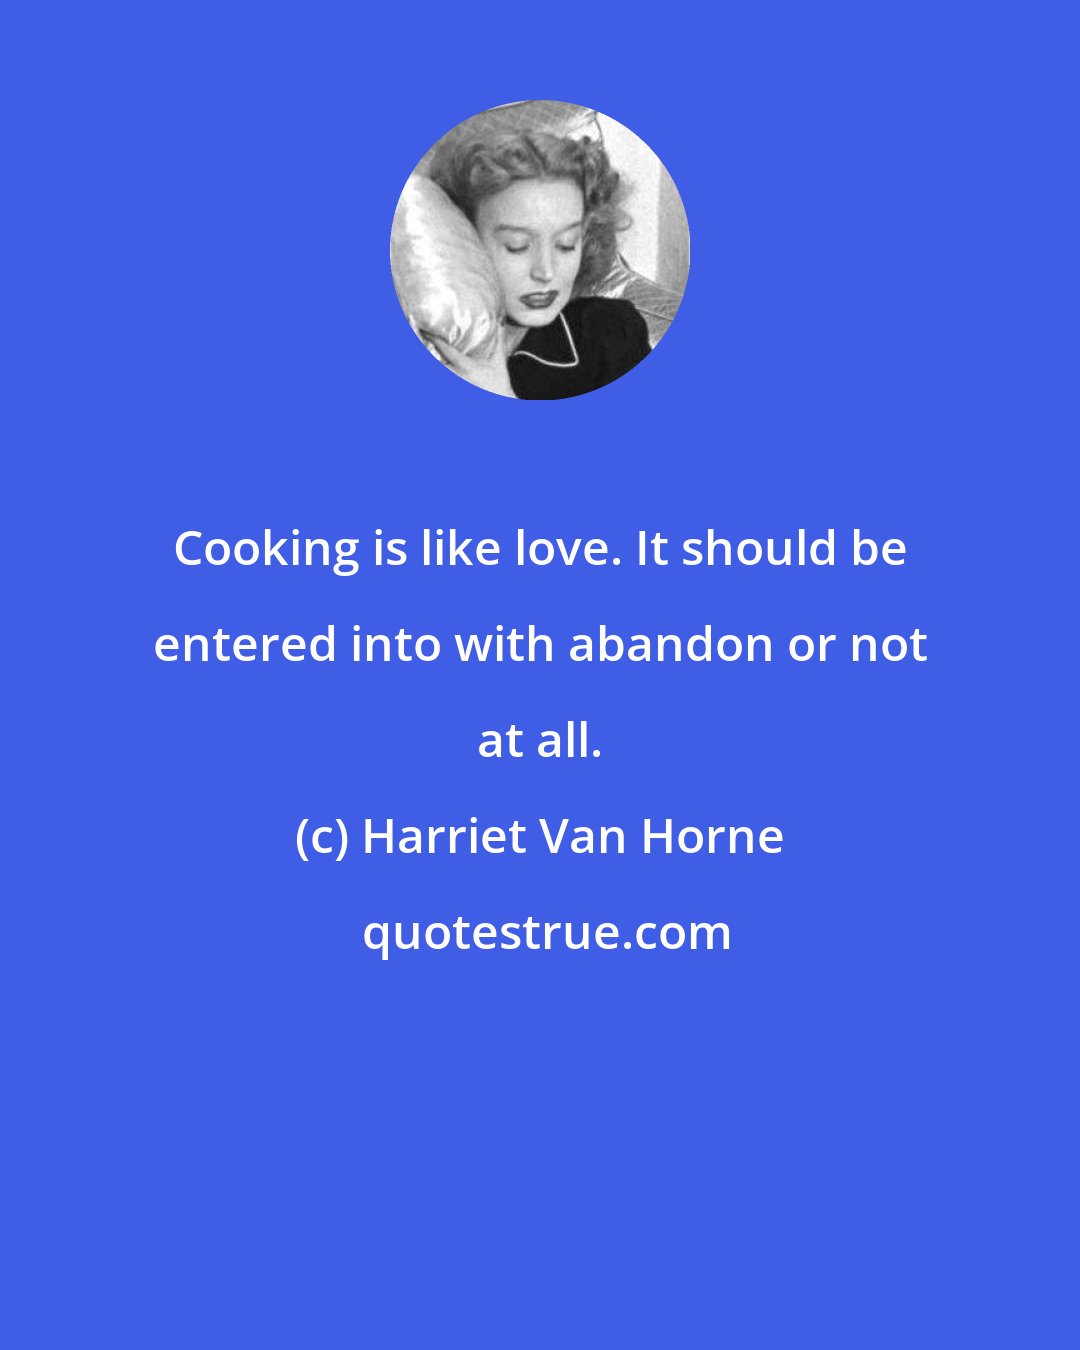 Harriet Van Horne: Cooking is like love. It should be entered into with abandon or not at all.